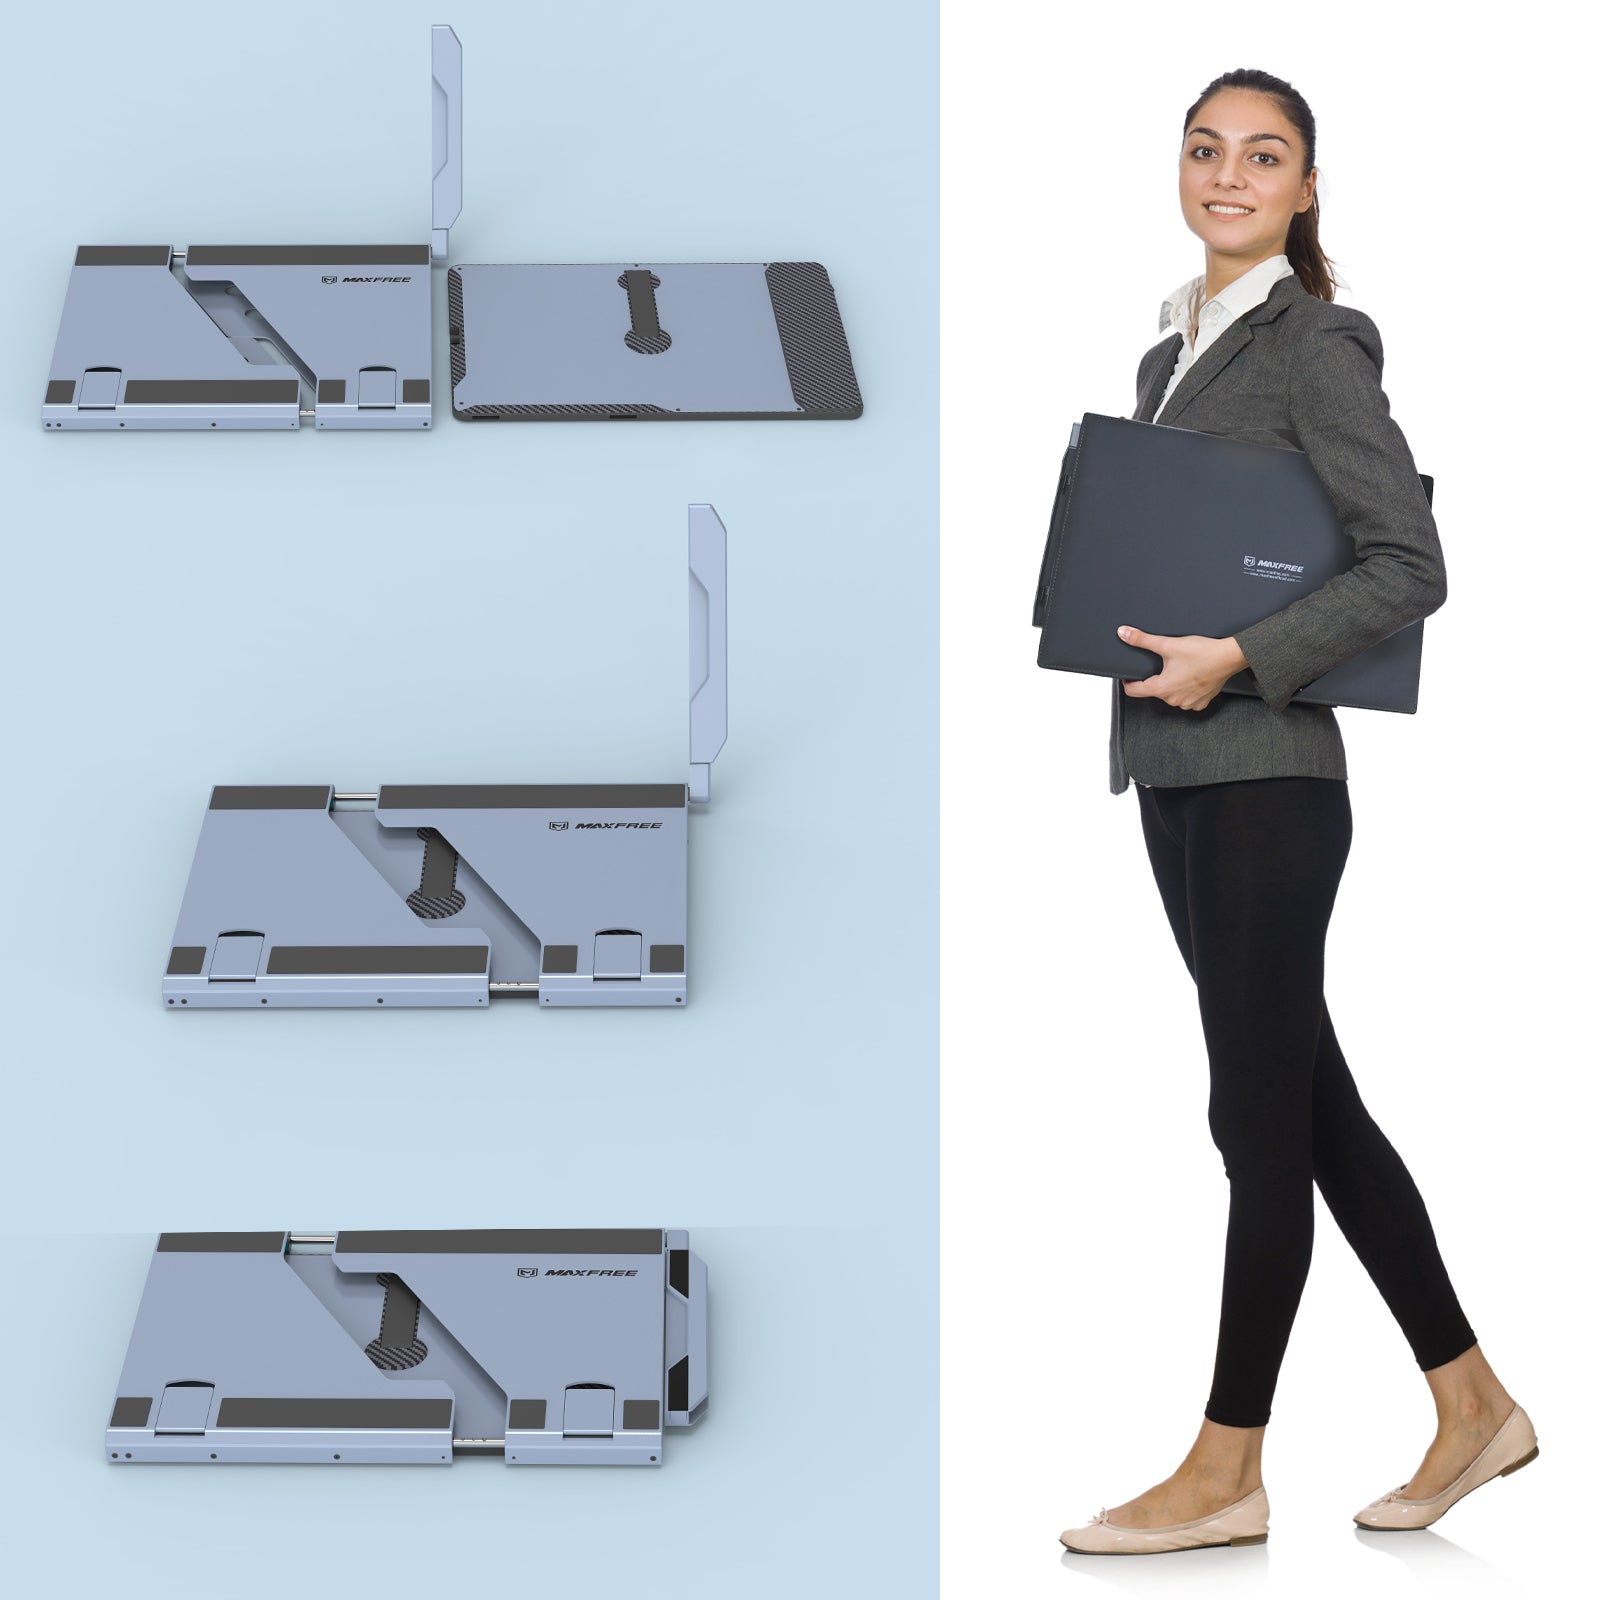 Maxfree F1 14" Portable Laptop Screen Extender with Stand